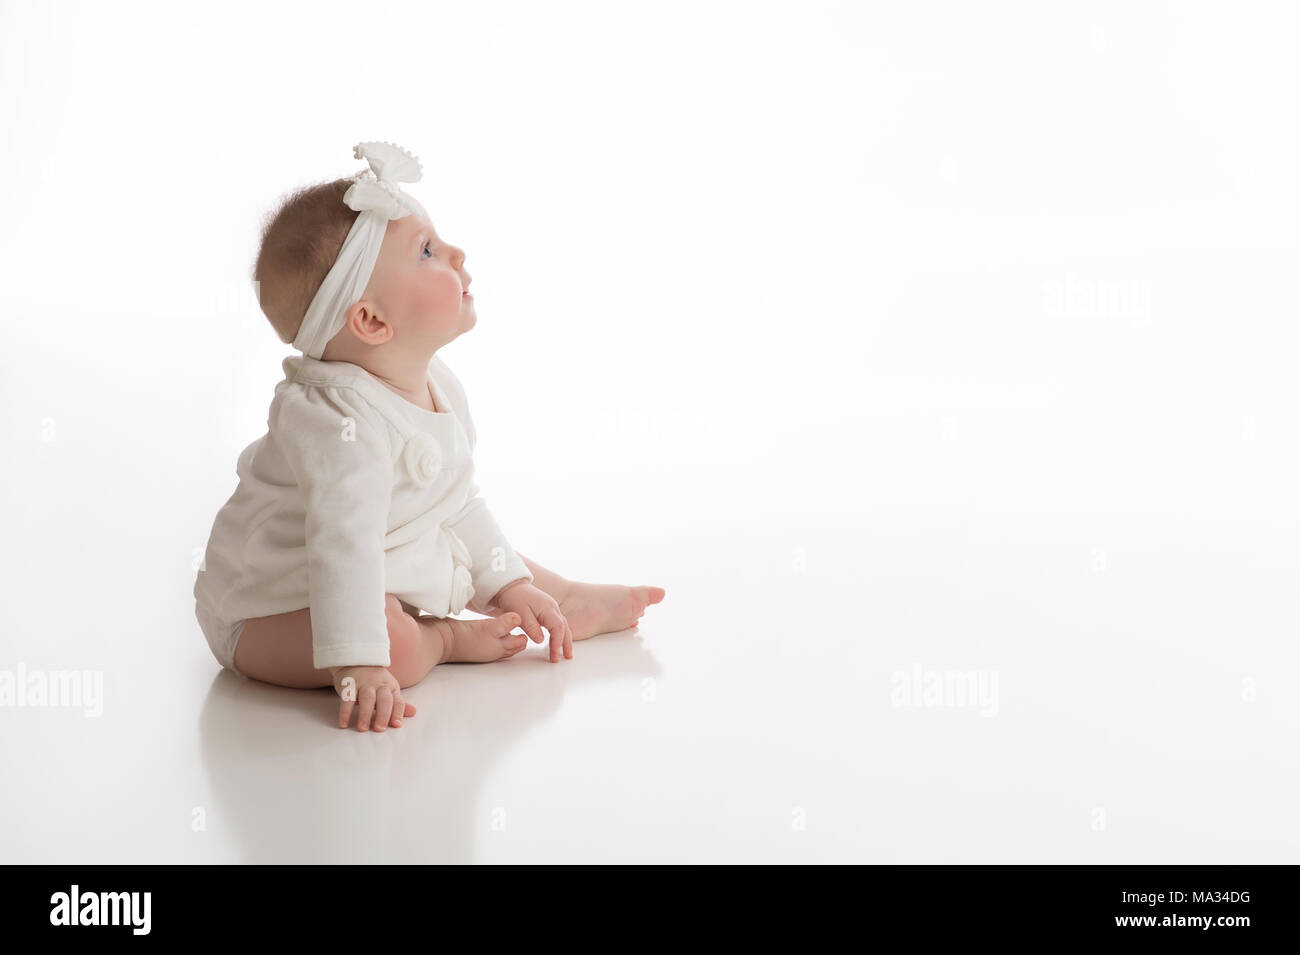 A profile view of a smiling, seven month old, baby girl wearing white. Shot in the studio on a white, seamless backdrop. Stock Photo